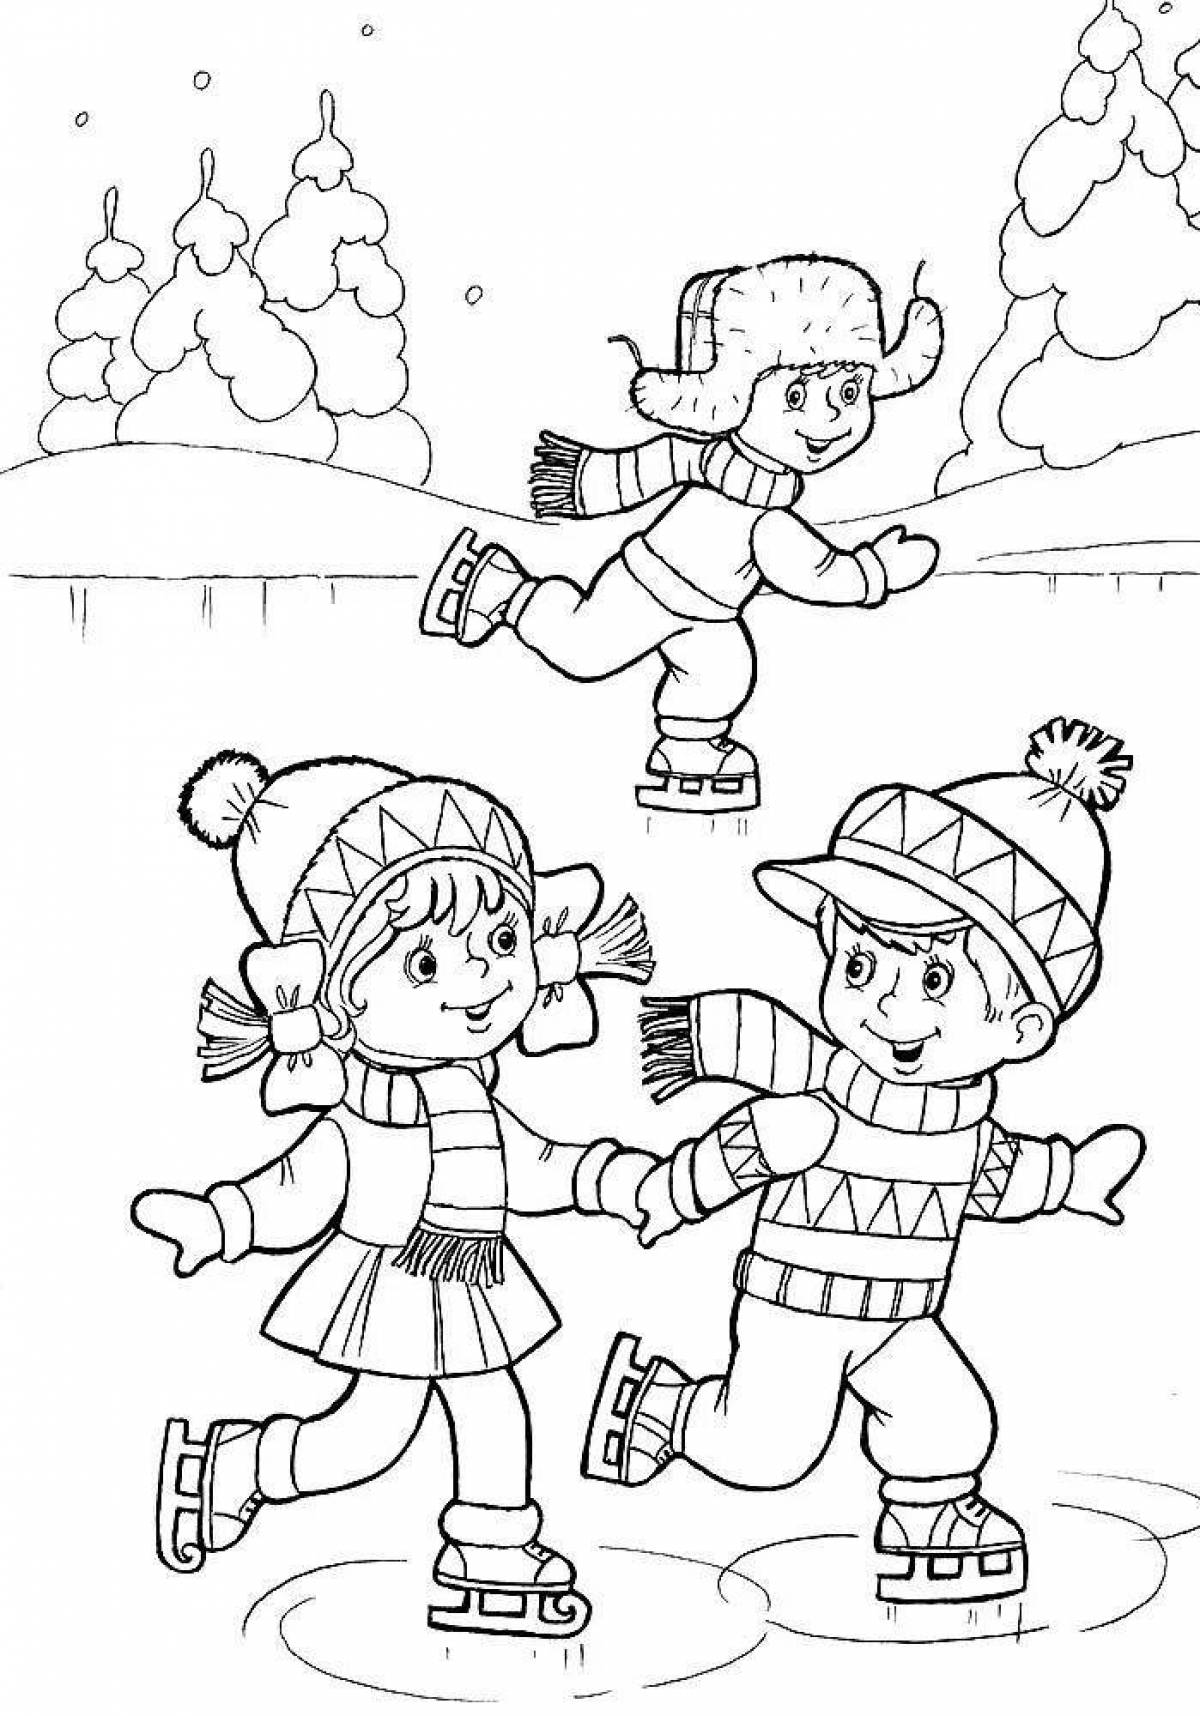 Entertaining children's funny coloring book